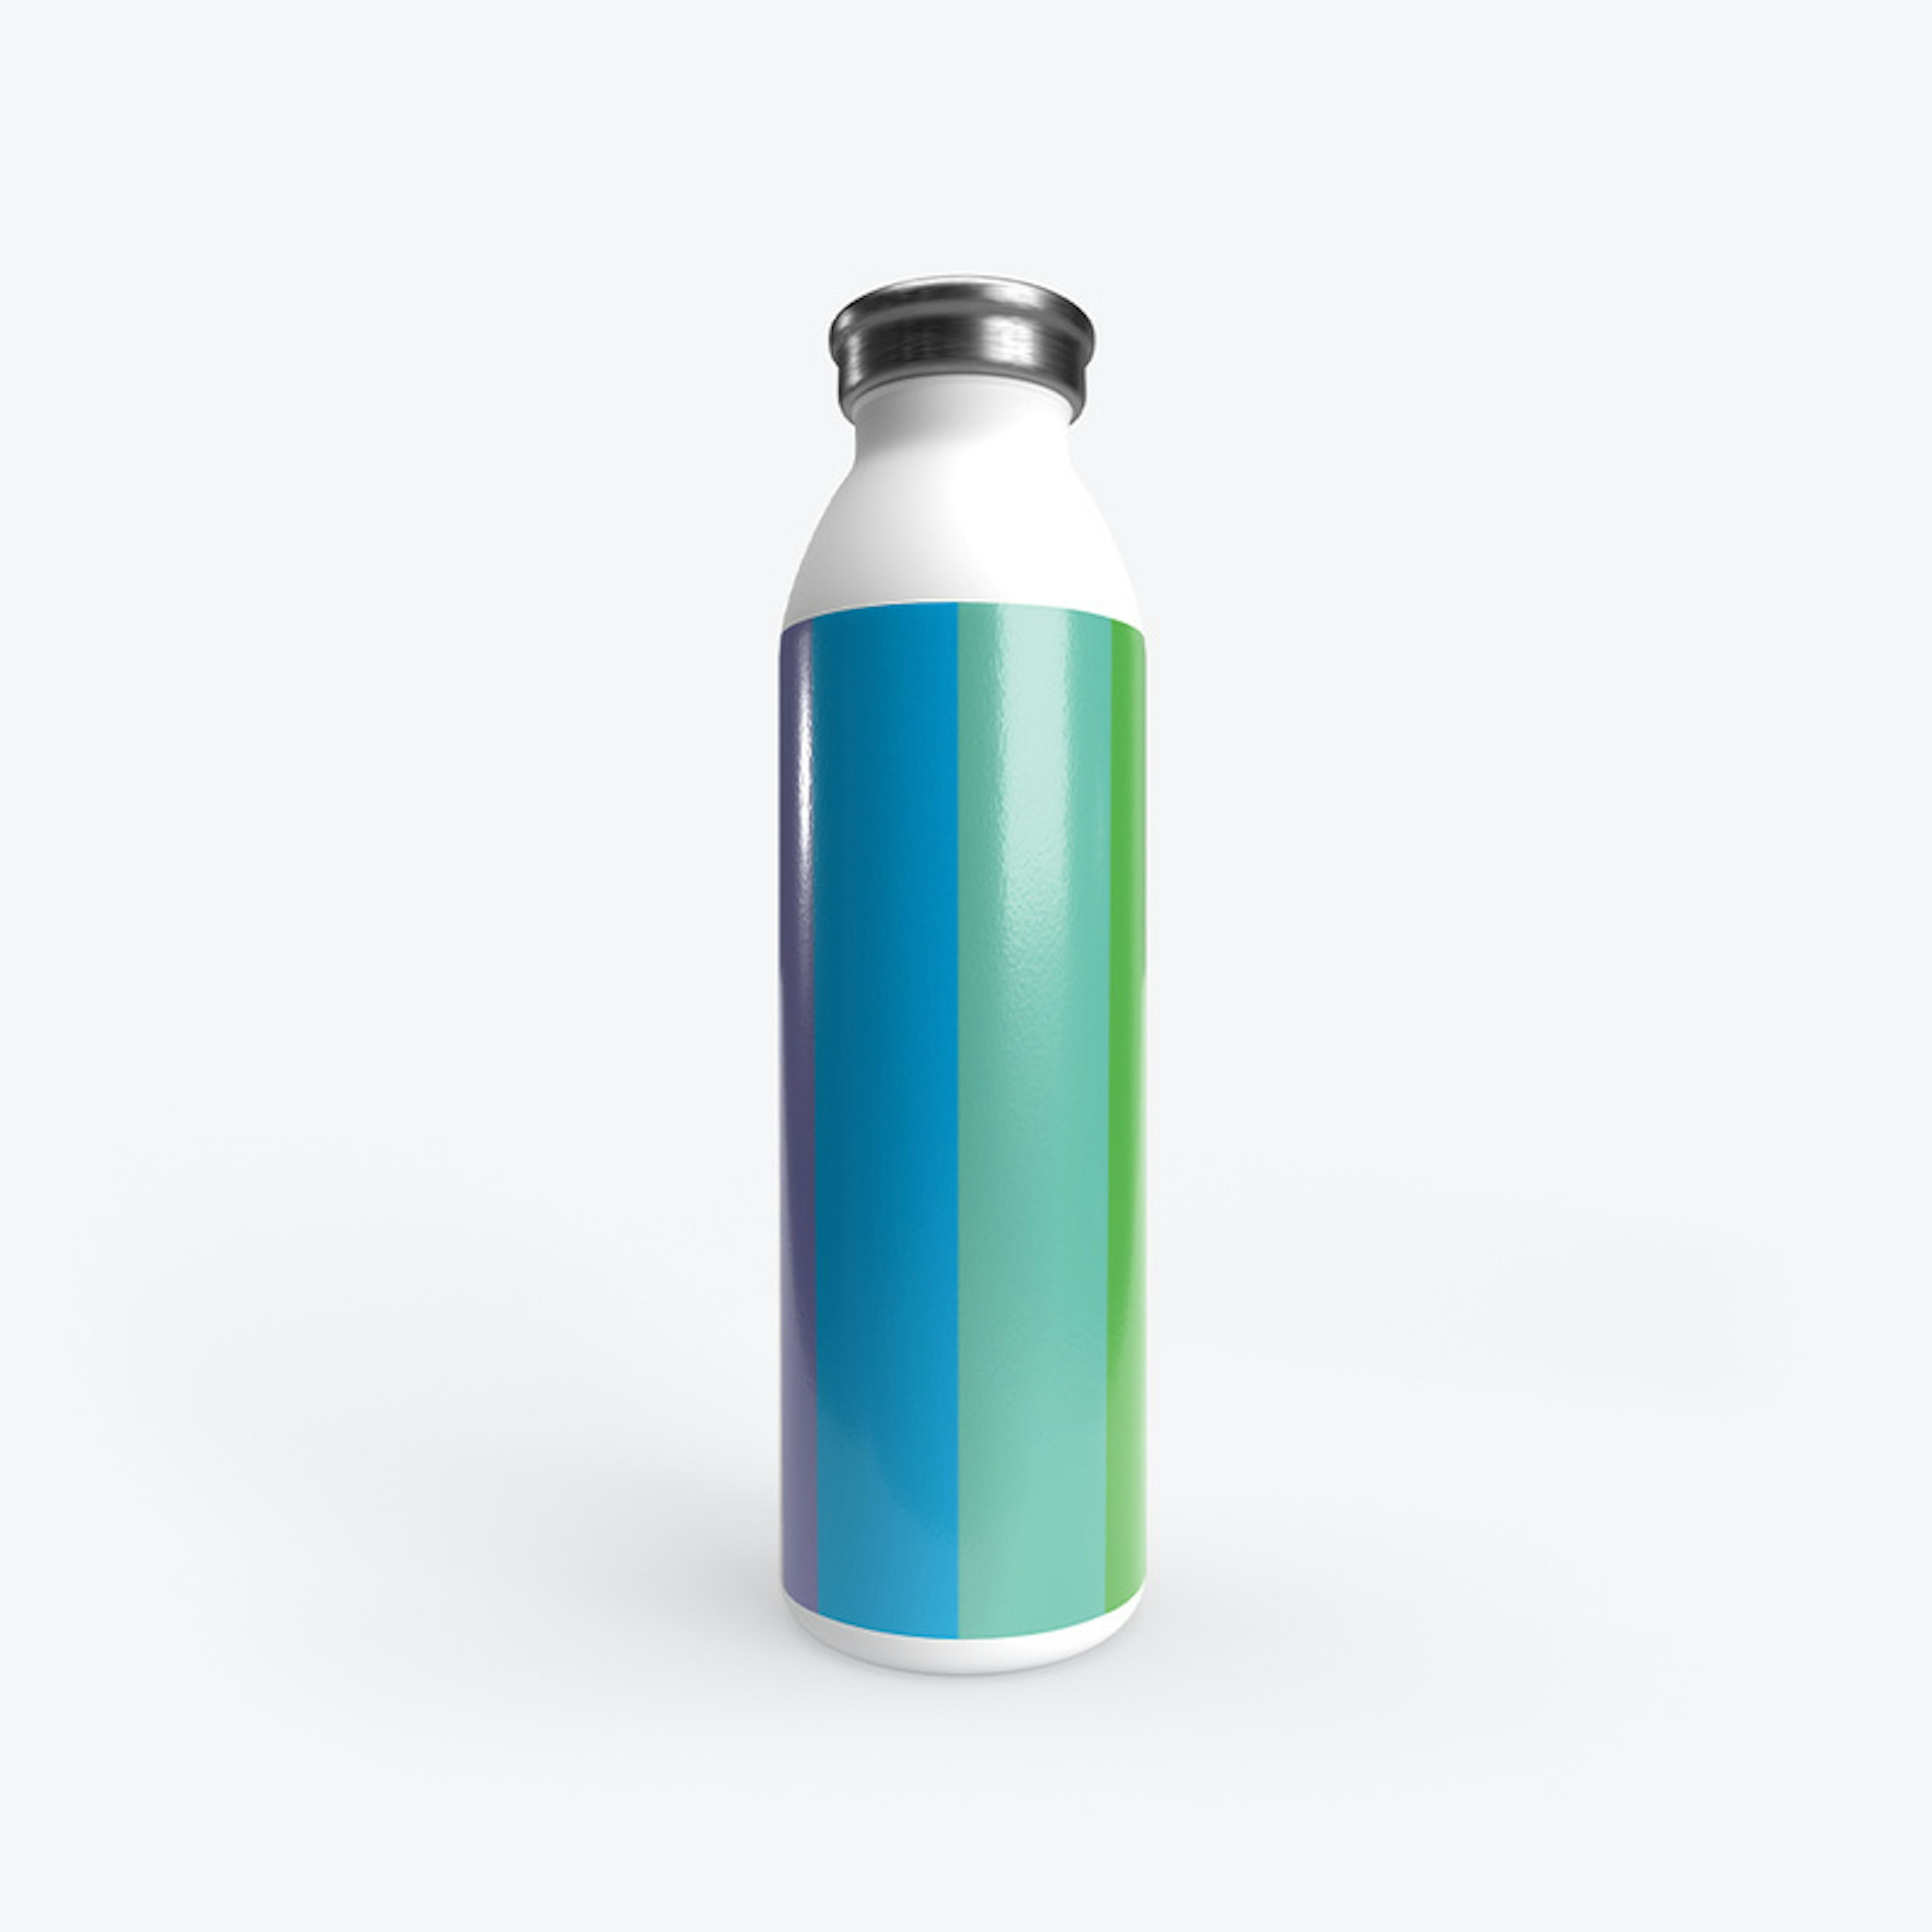 The Society Striped Design Water Bottle